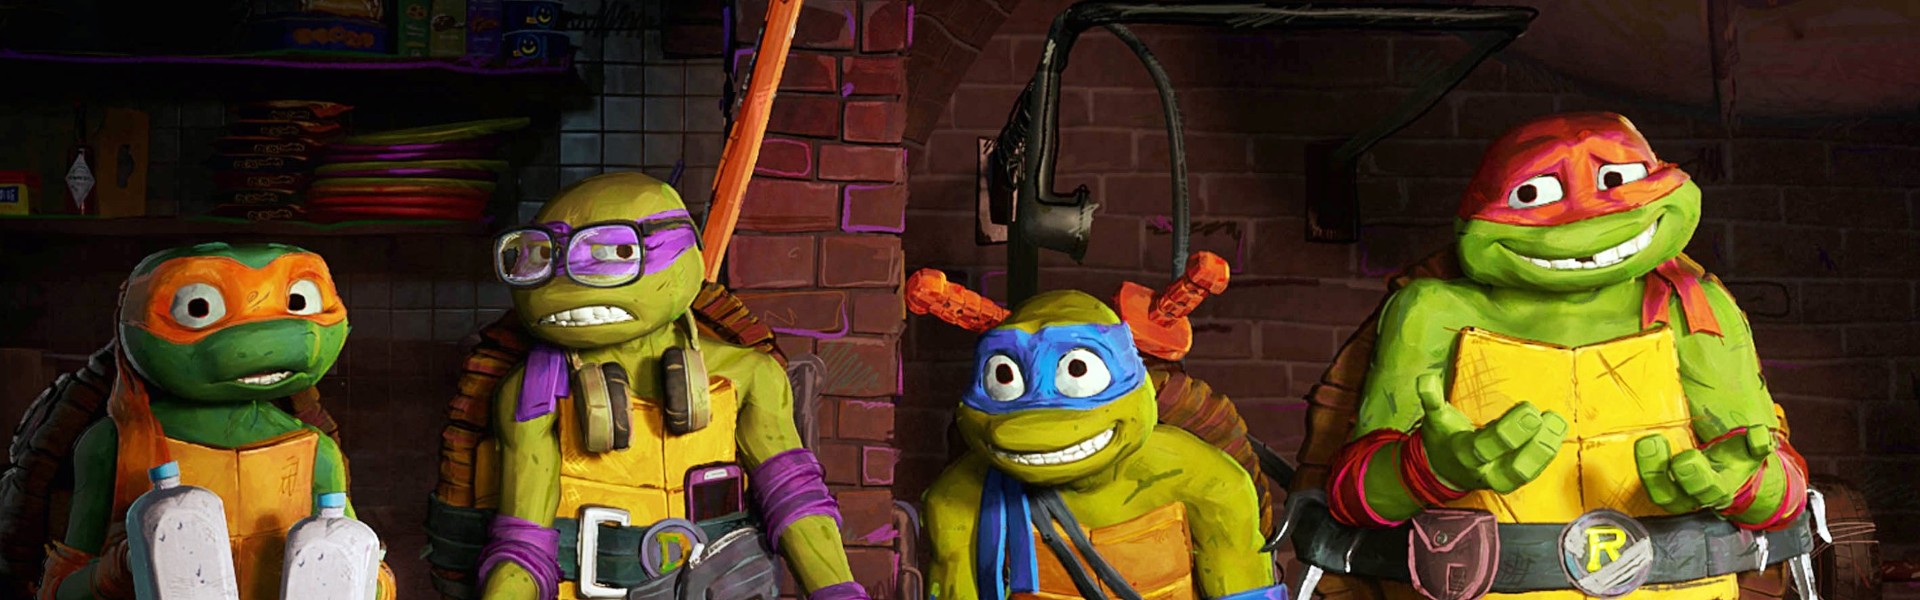 “Mutant Chaos” is just the beginning. The Teenage Mutant Ninja Turtles have another movie and series